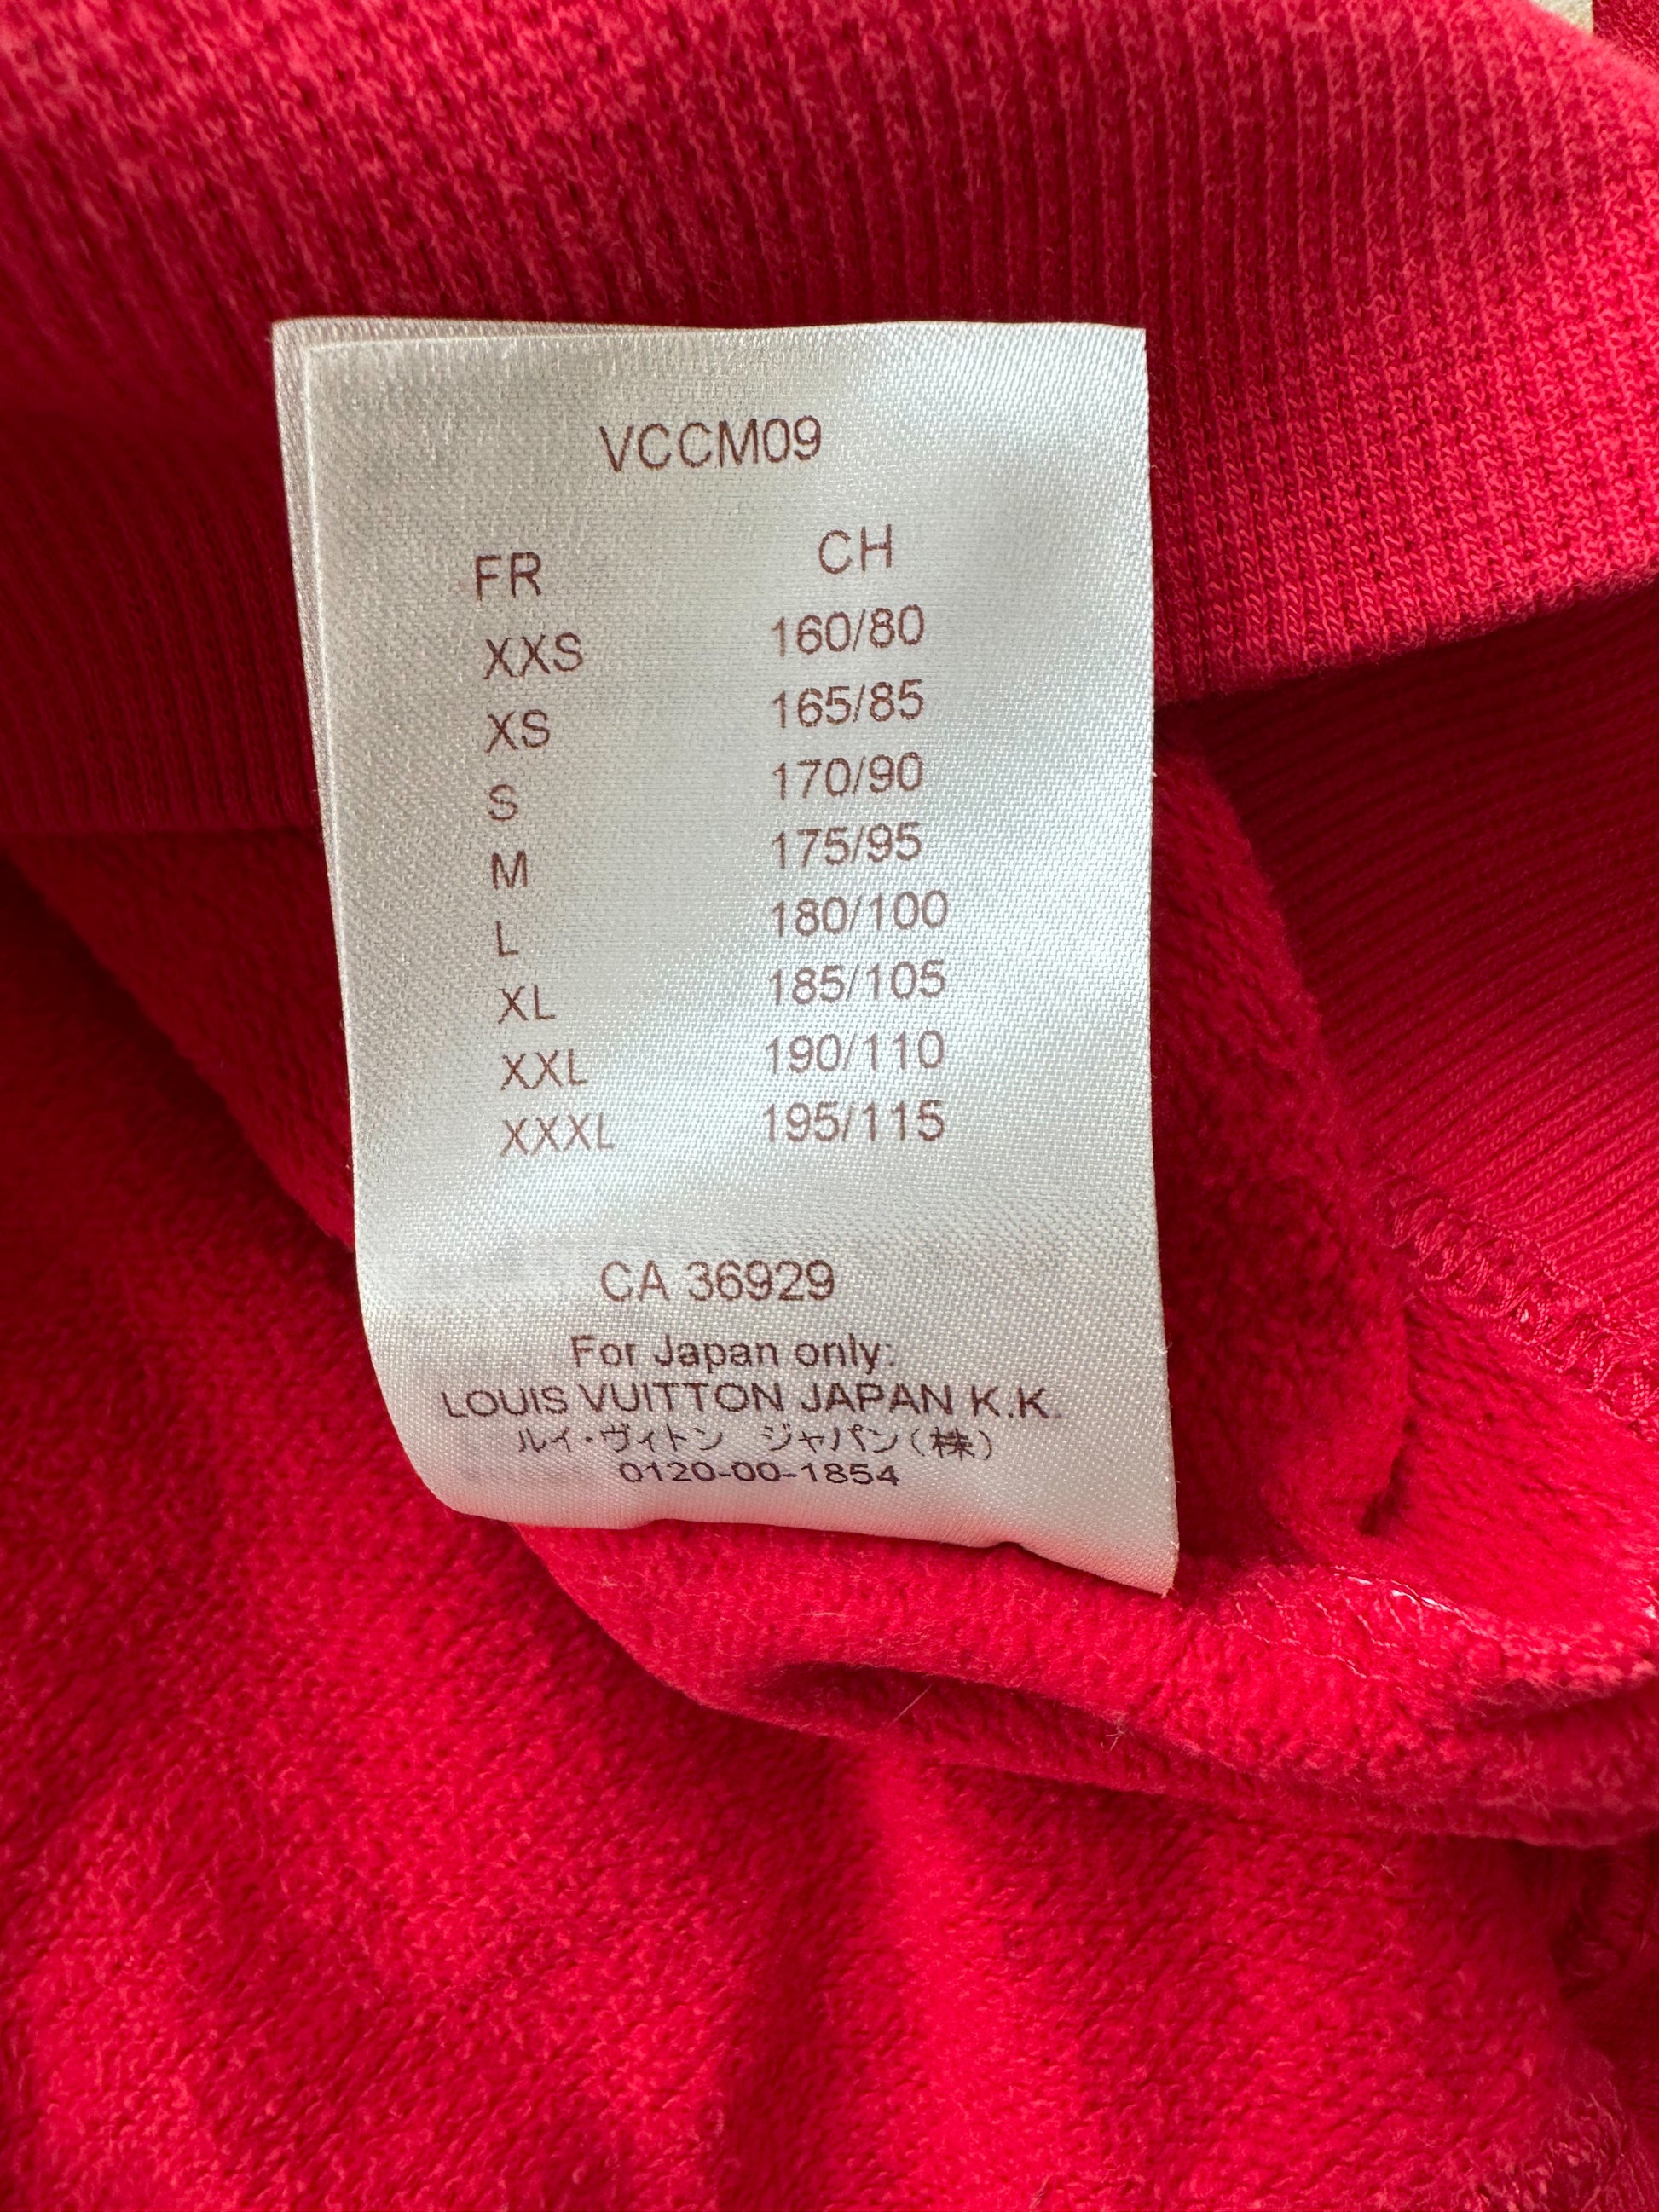 louis vuitton hoodie red